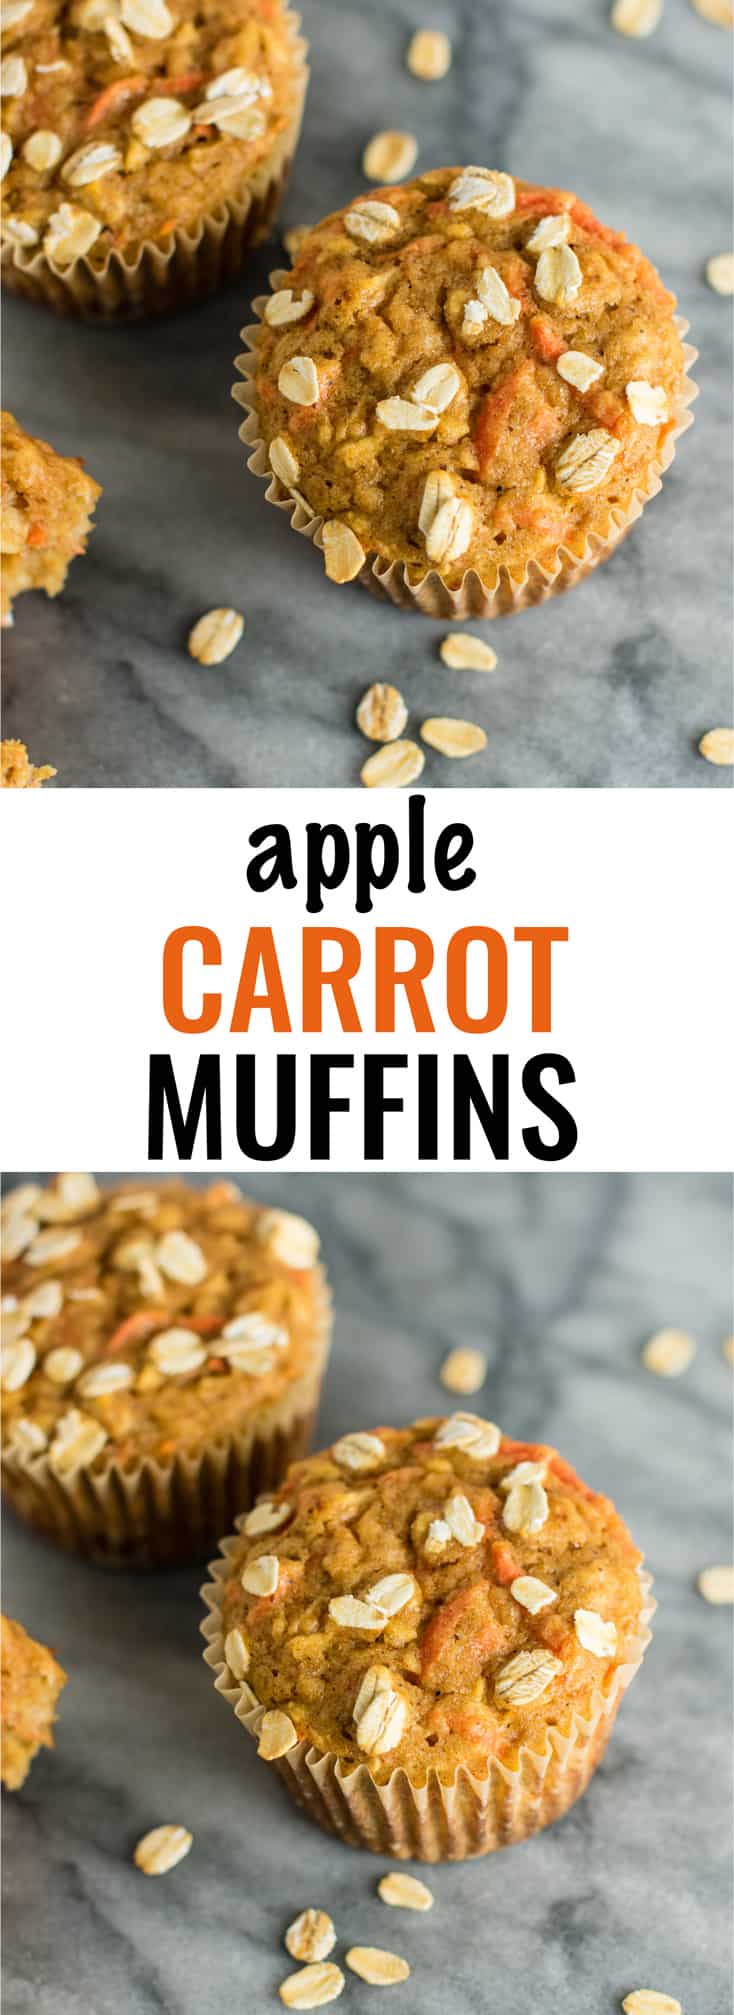 wholesome carrot apple muffins